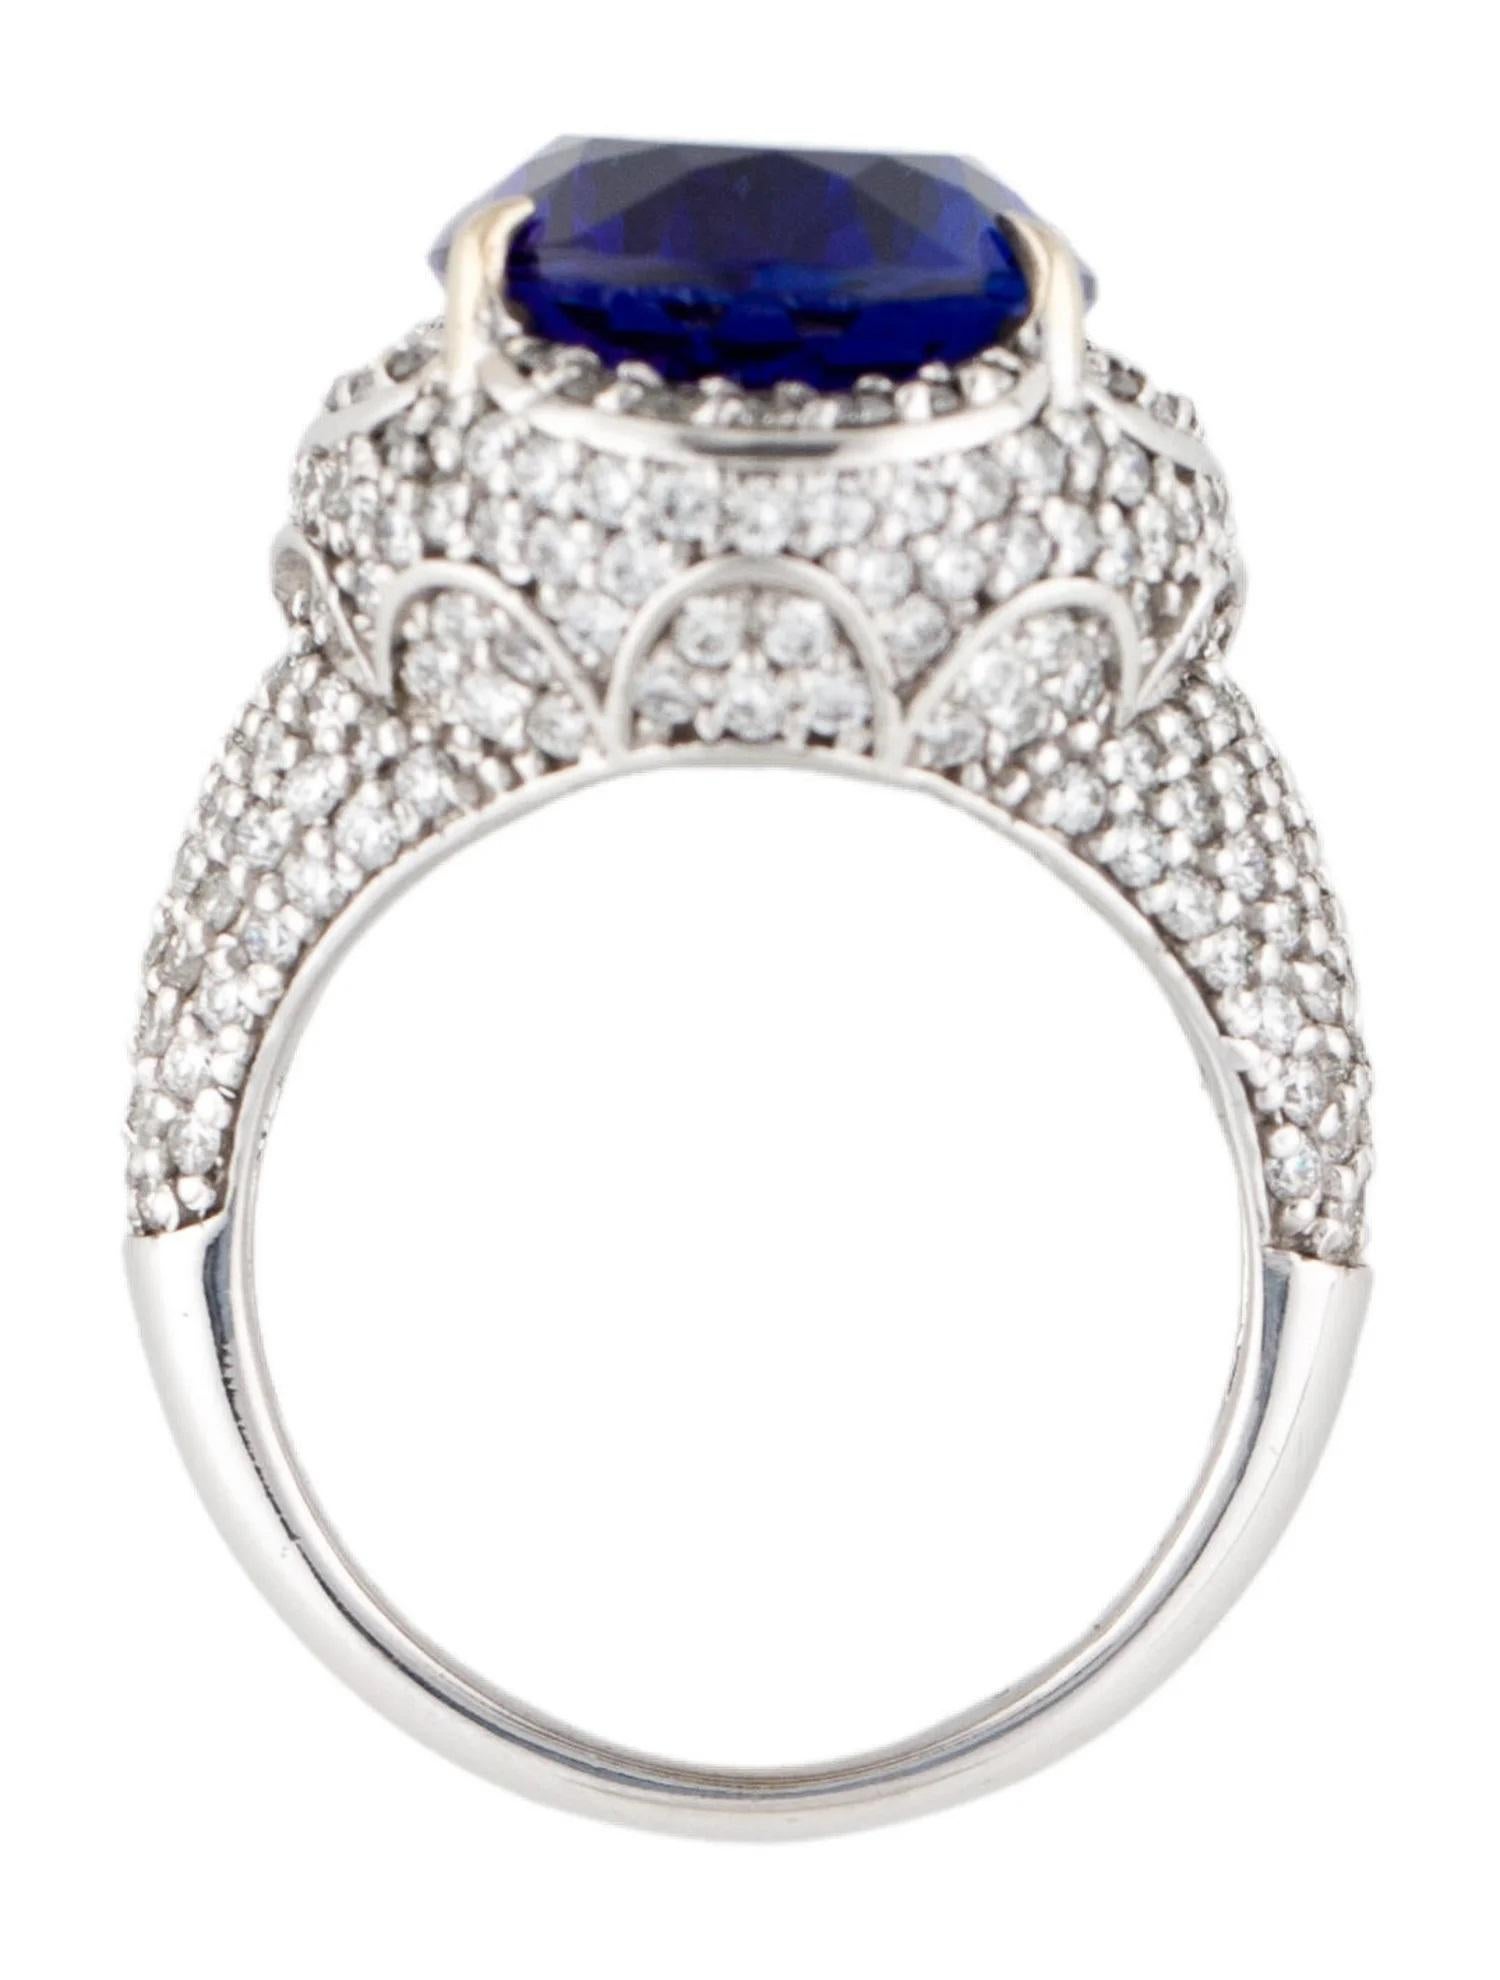 10.89 Ct Tanzanite & Diamond Cocktail Ring 14K White Gold In Excellent Condition For Sale In New York, NY